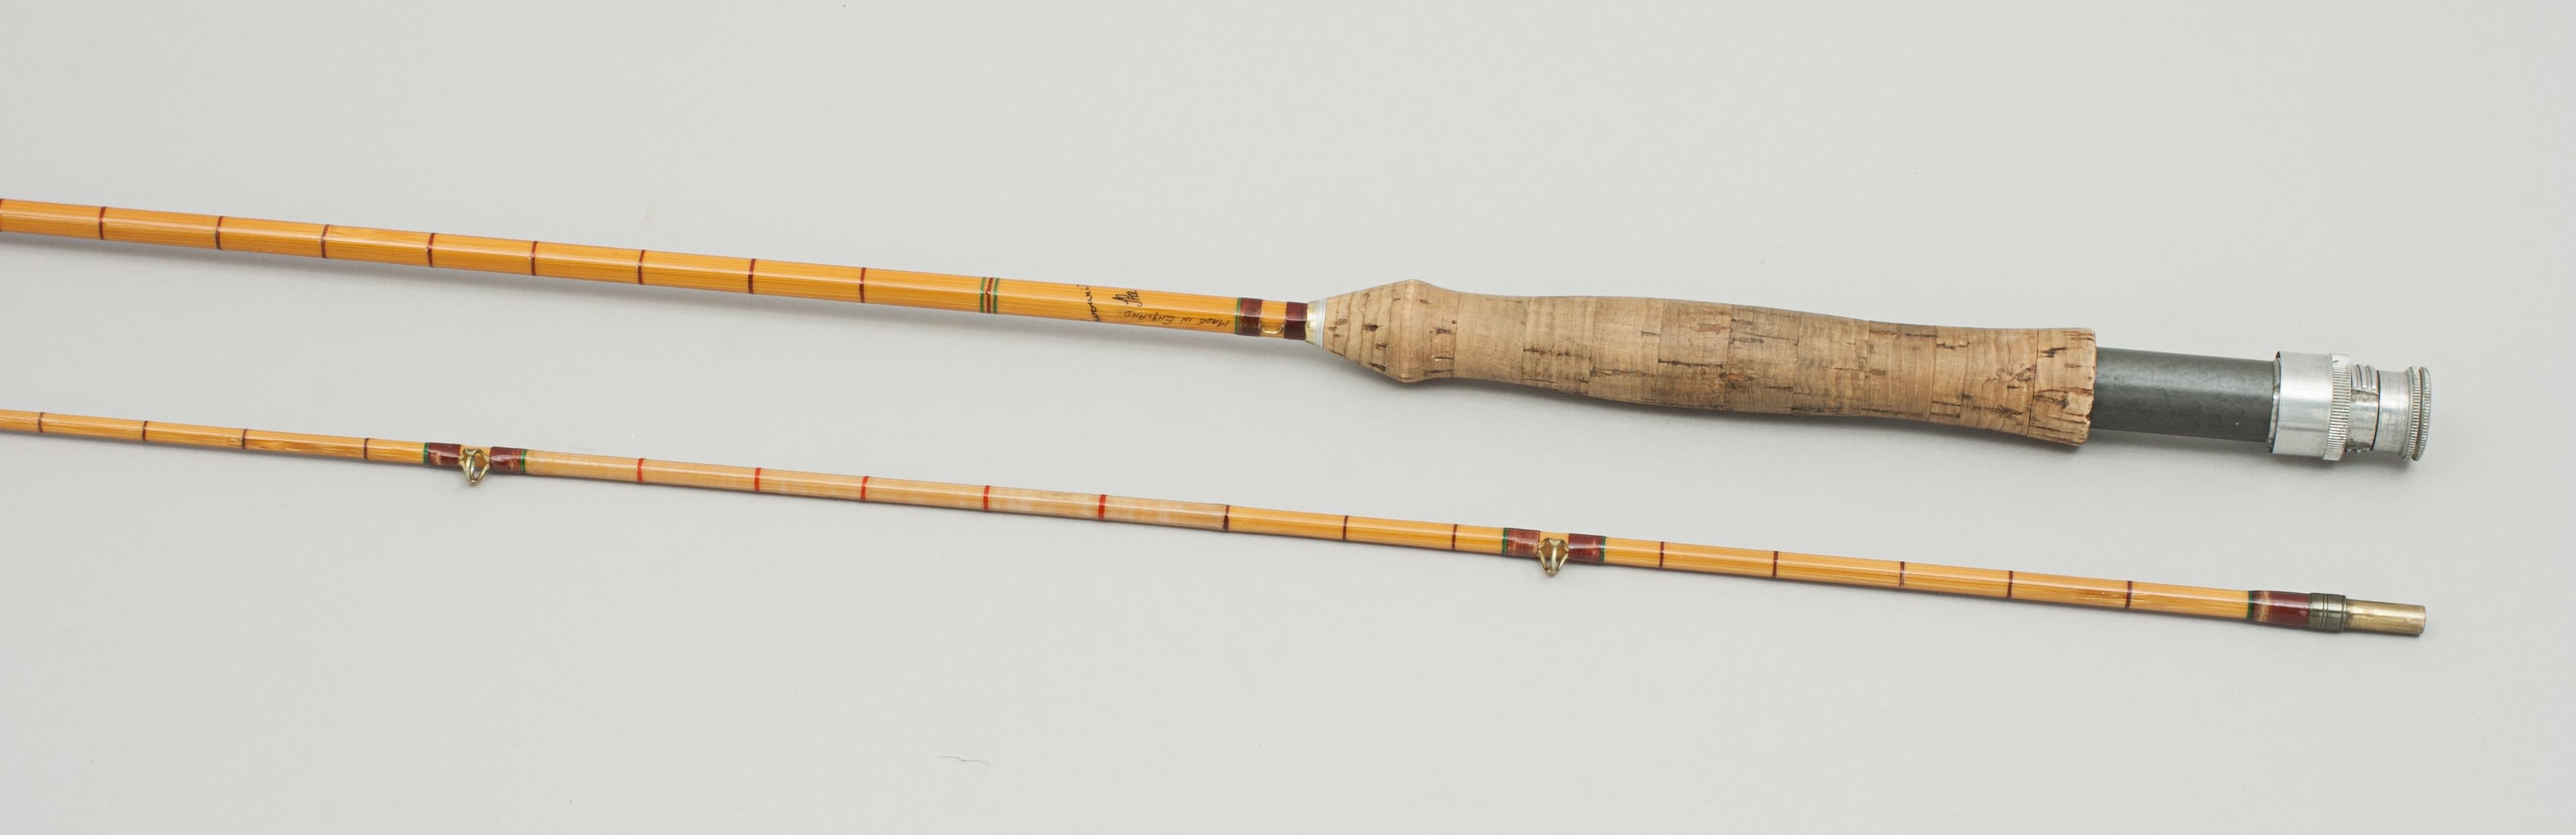 Bamboo Vintage Fly Fishing Rod by Fosters 'The England's Favourite' Split Cane